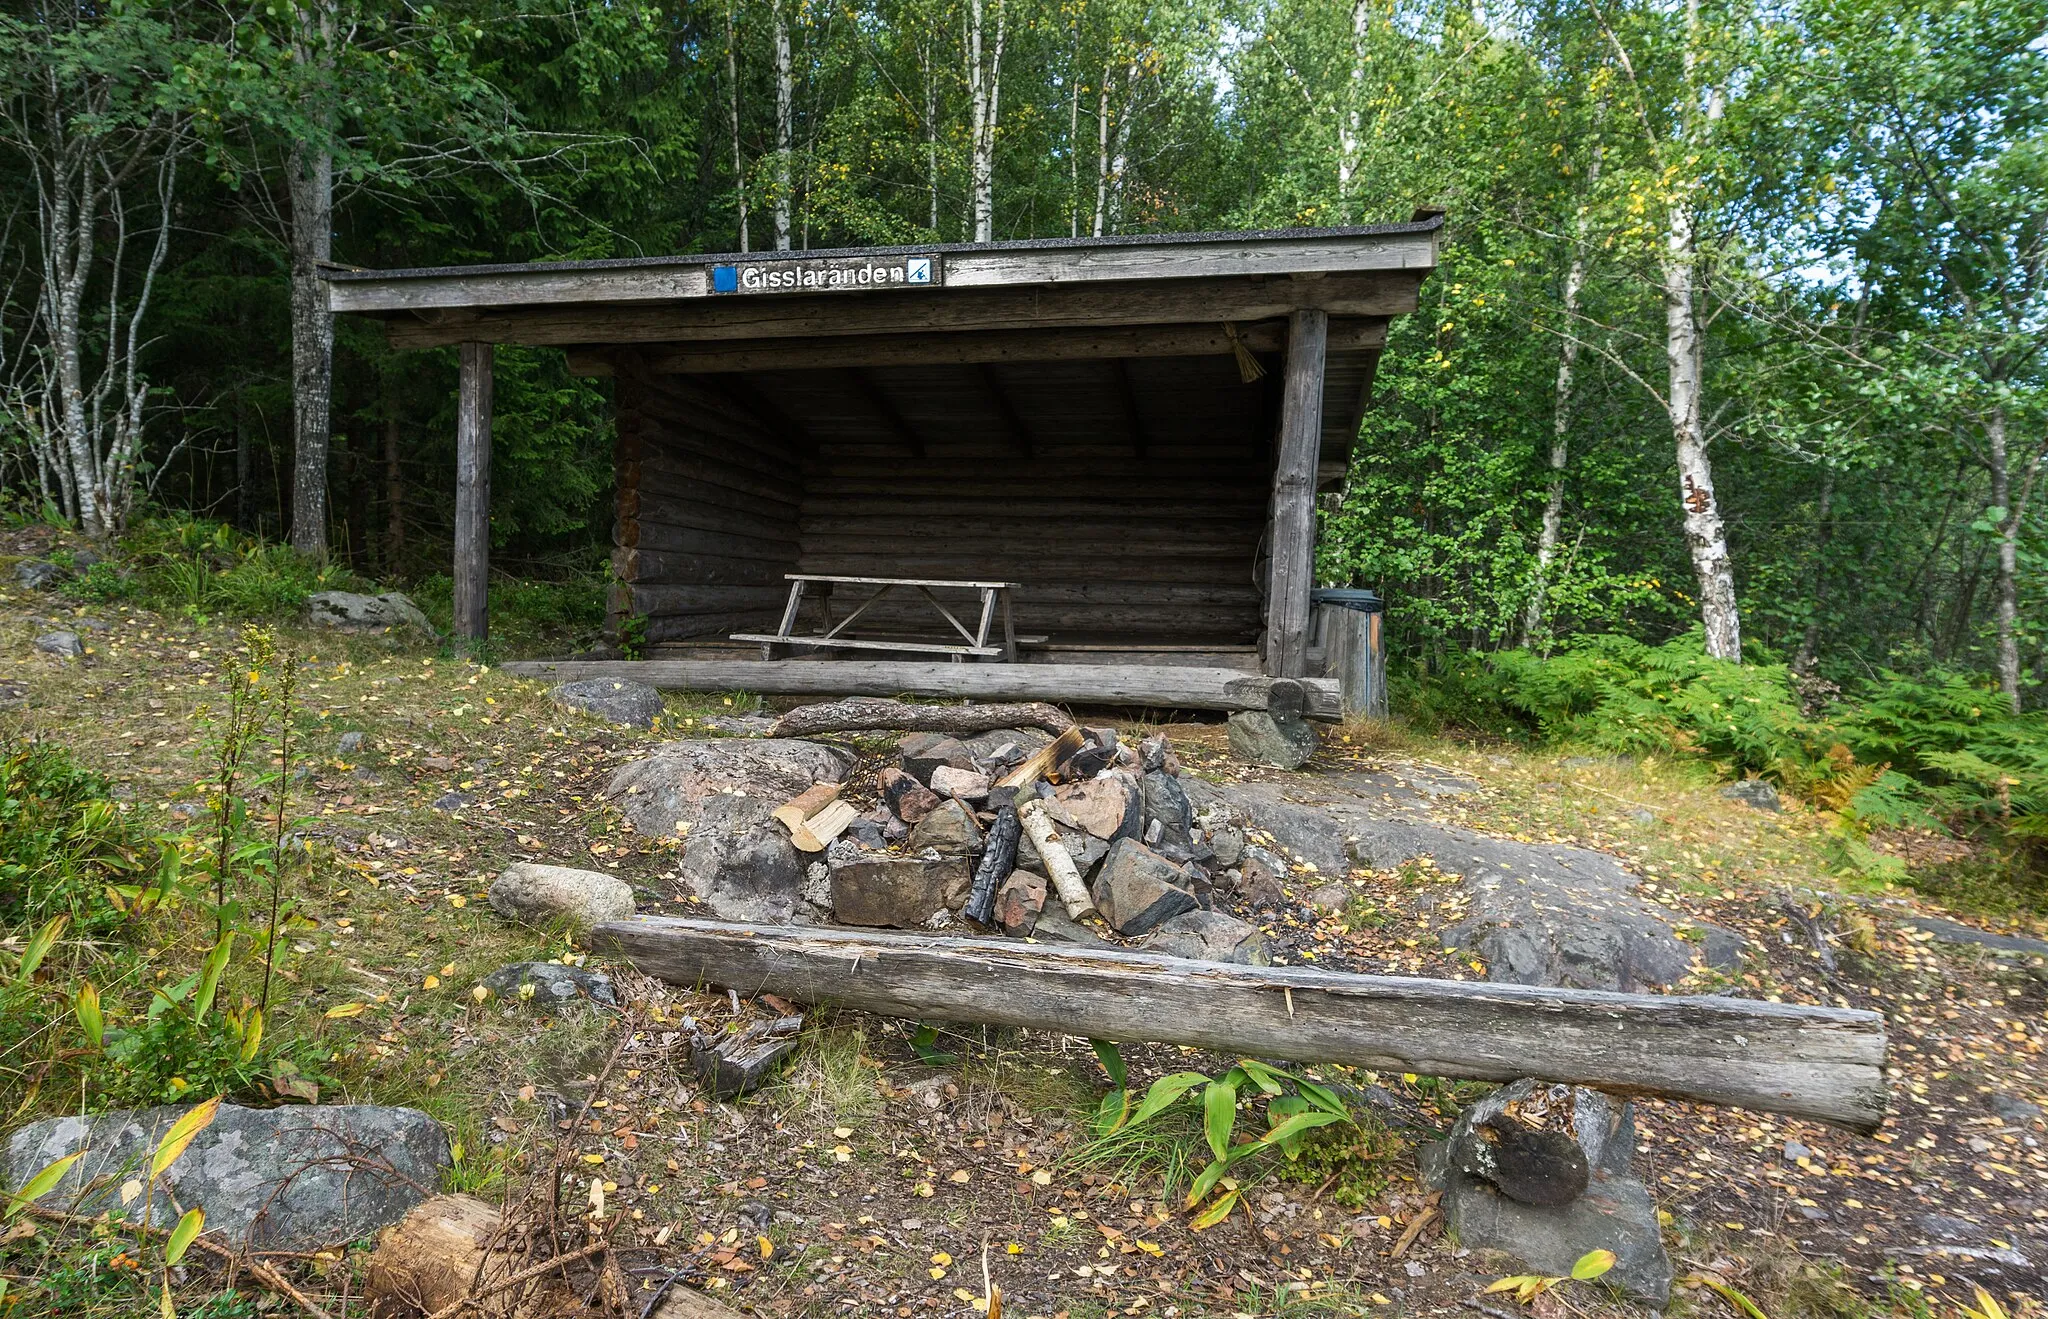 Photo showing: A hiking shelter by the lake Gisslaren. Taken from the hiking trail Upplandsleden between the Vällen lake and Gimo, Sweden